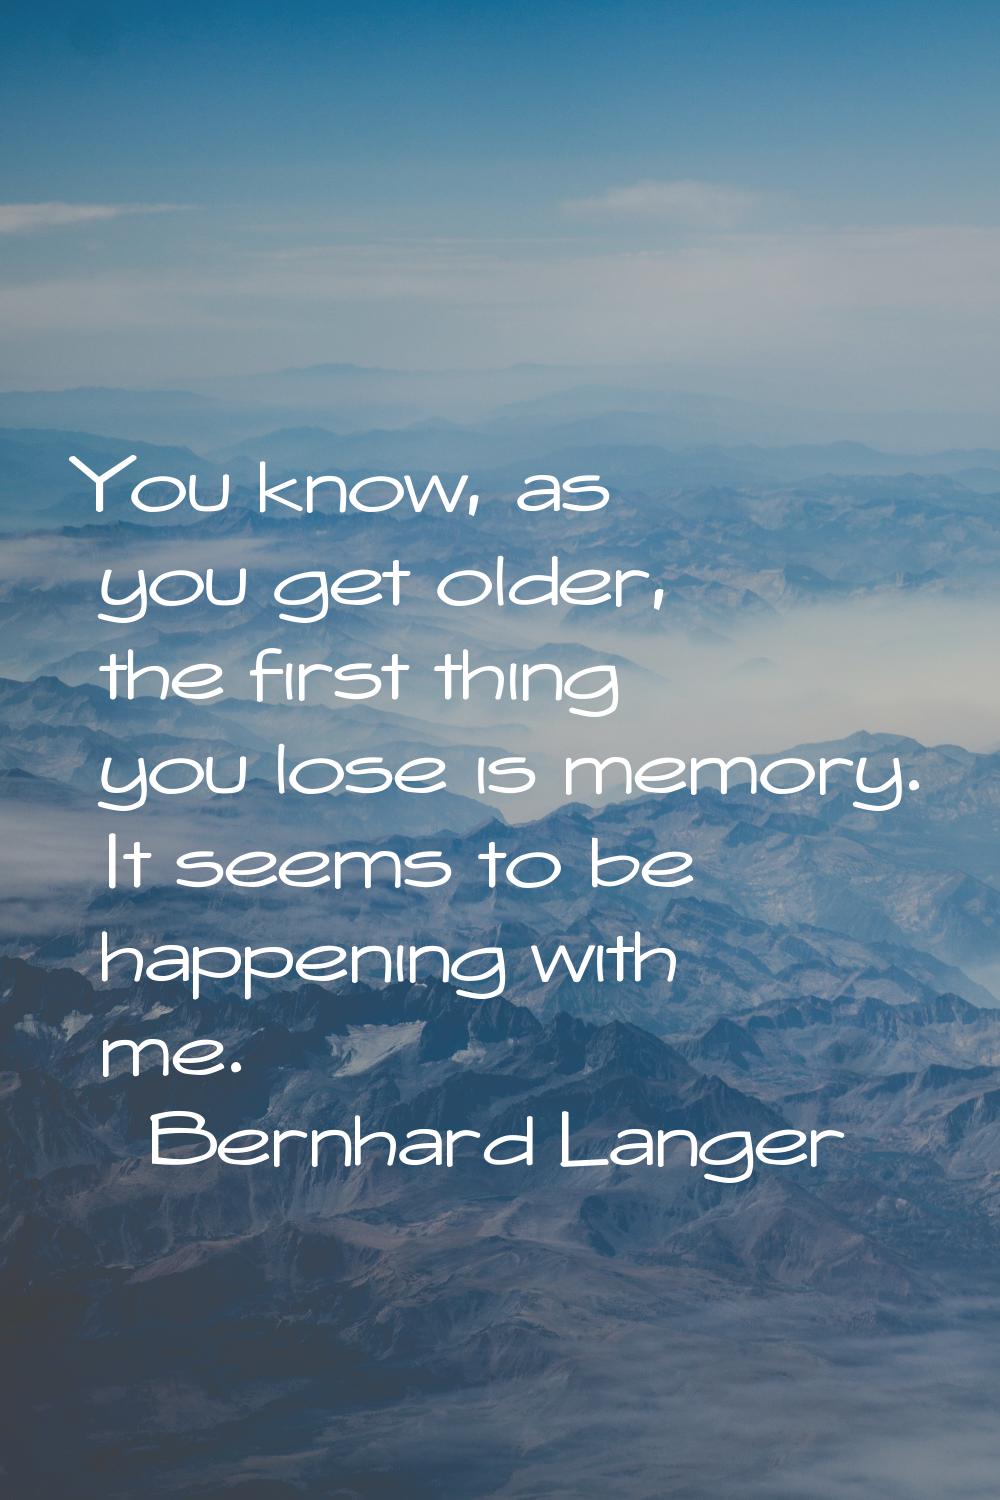 You know, as you get older, the first thing you lose is memory. It seems to be happening with me.